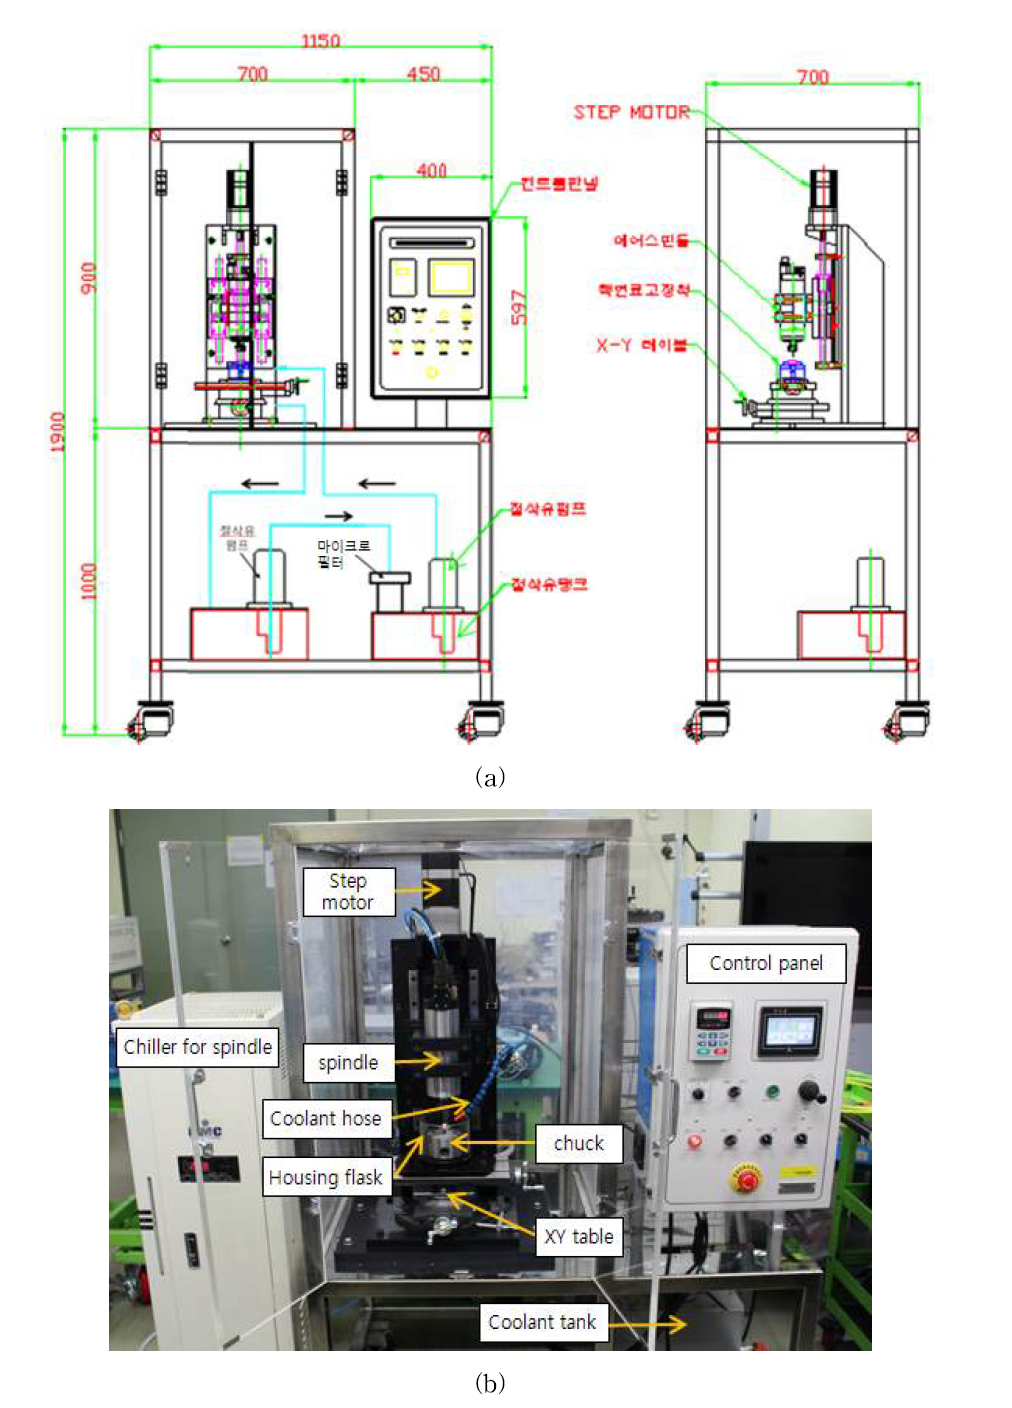 Drilling machine (a) assembly drawing of a UO2 drilling machine (b) implemented UO2 drilling machine